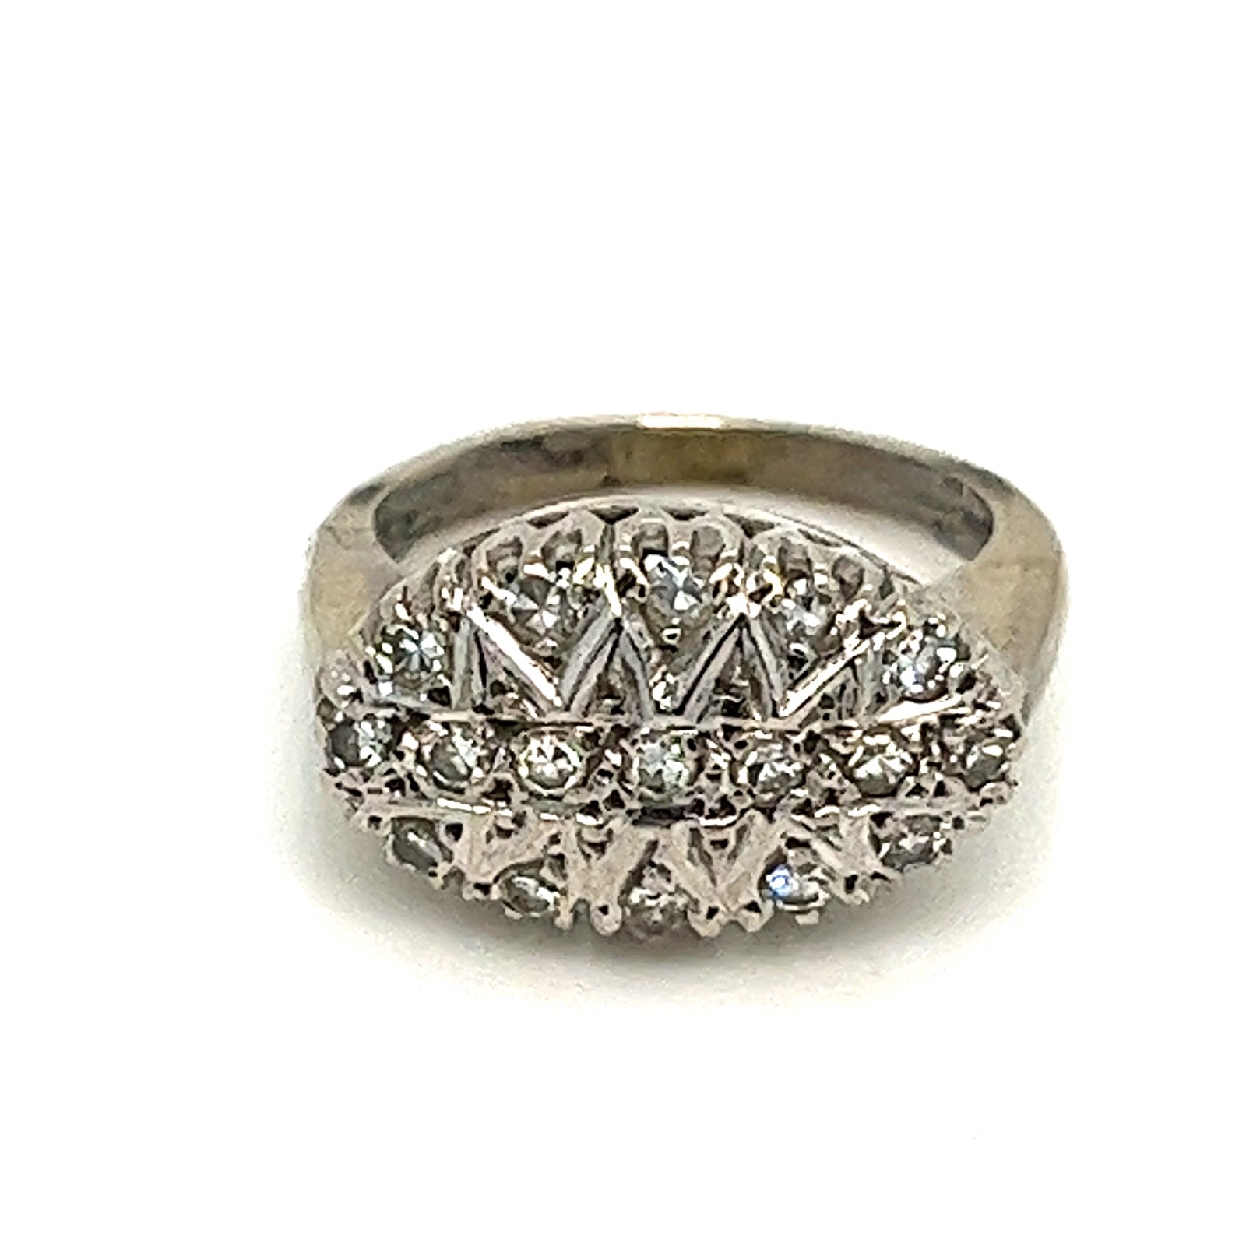 14K White Gold Antique .34cttw Diamond Ring in Hand Engraved Setting with Seventeen .02CT/SI1 Round Single-Cut Diamonds

Size 2
Appraisal on File